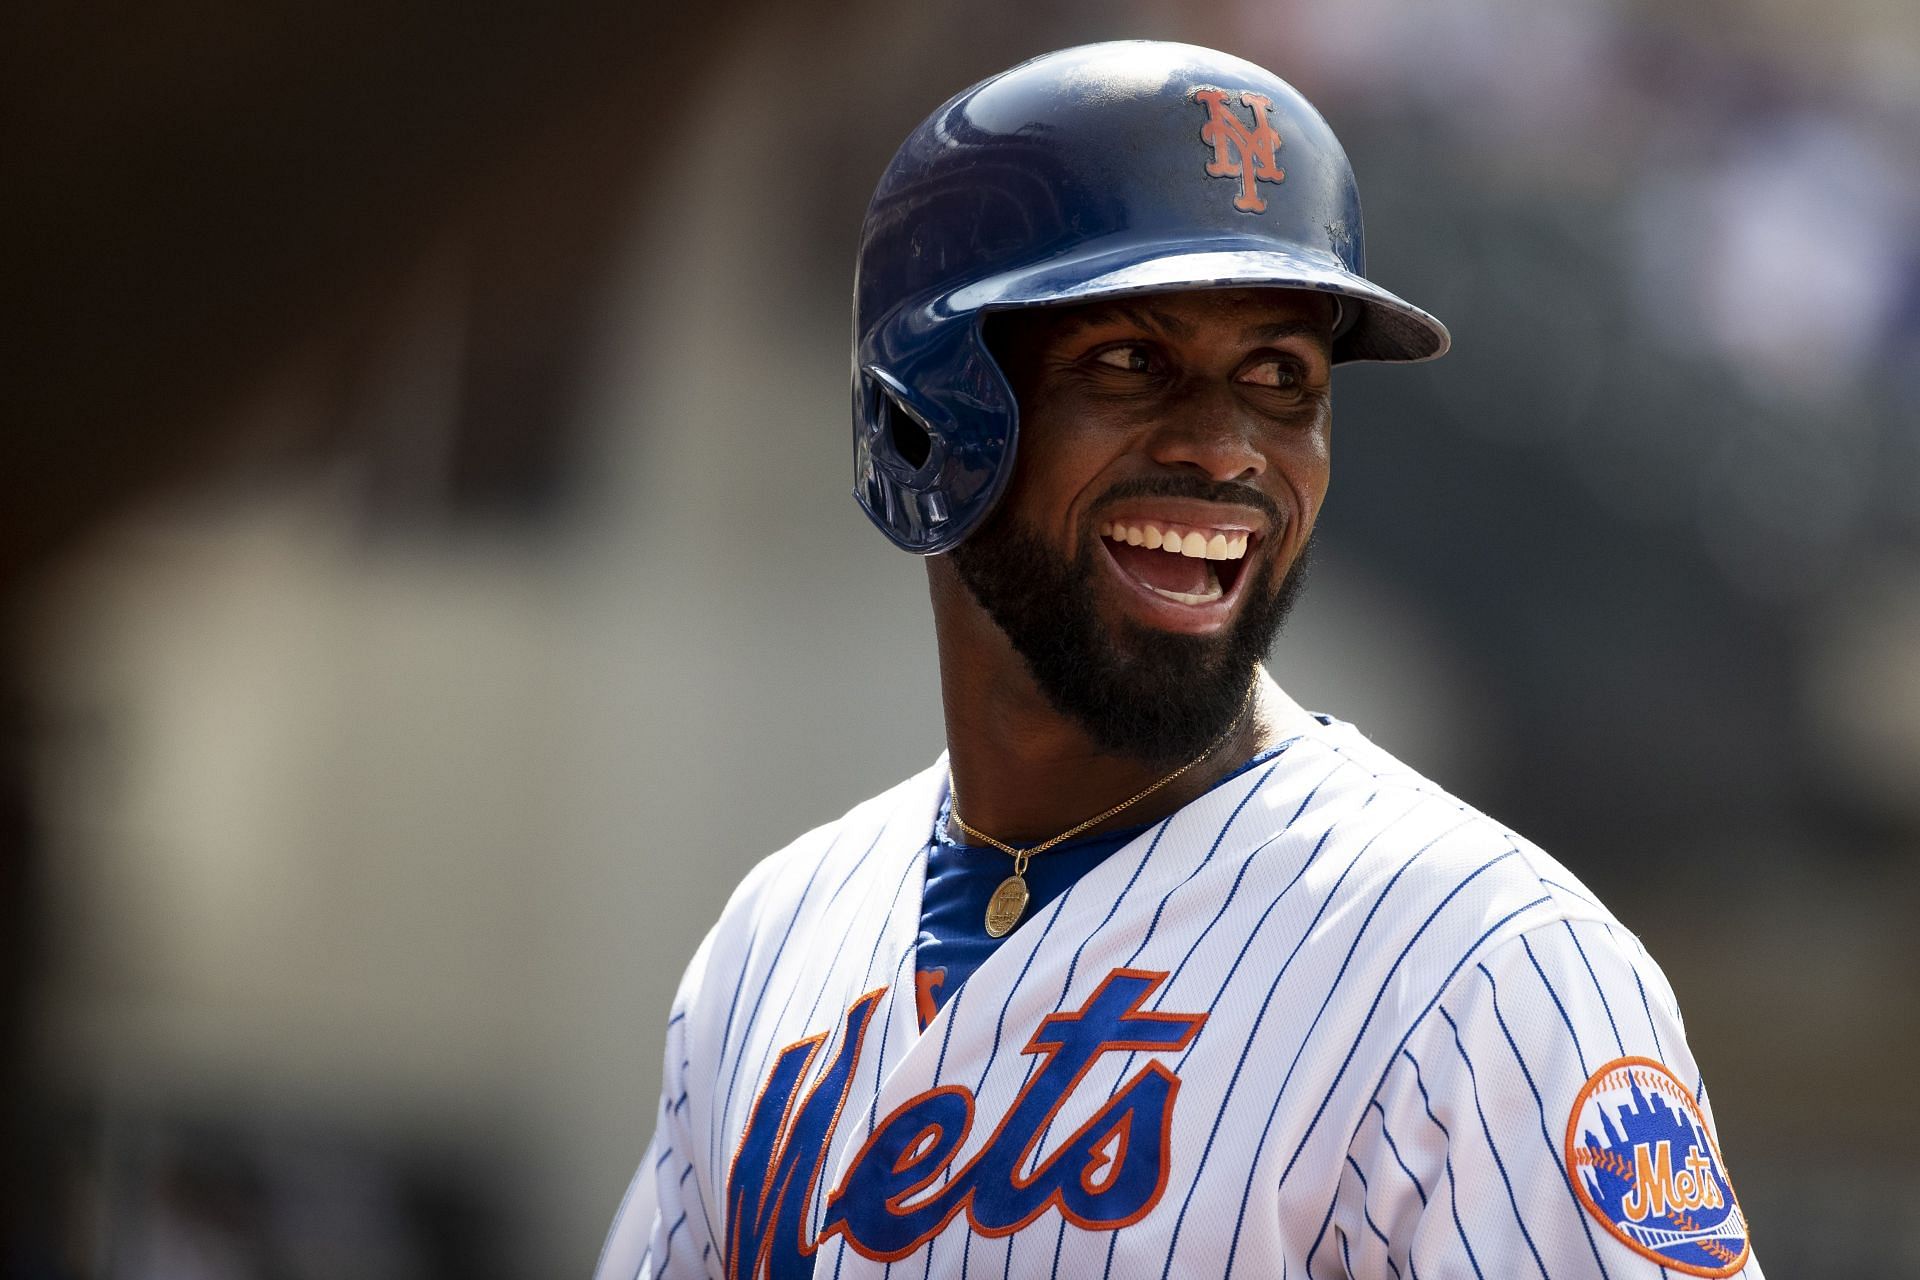 Jose Reyes felt right at home in a Mets uniform.